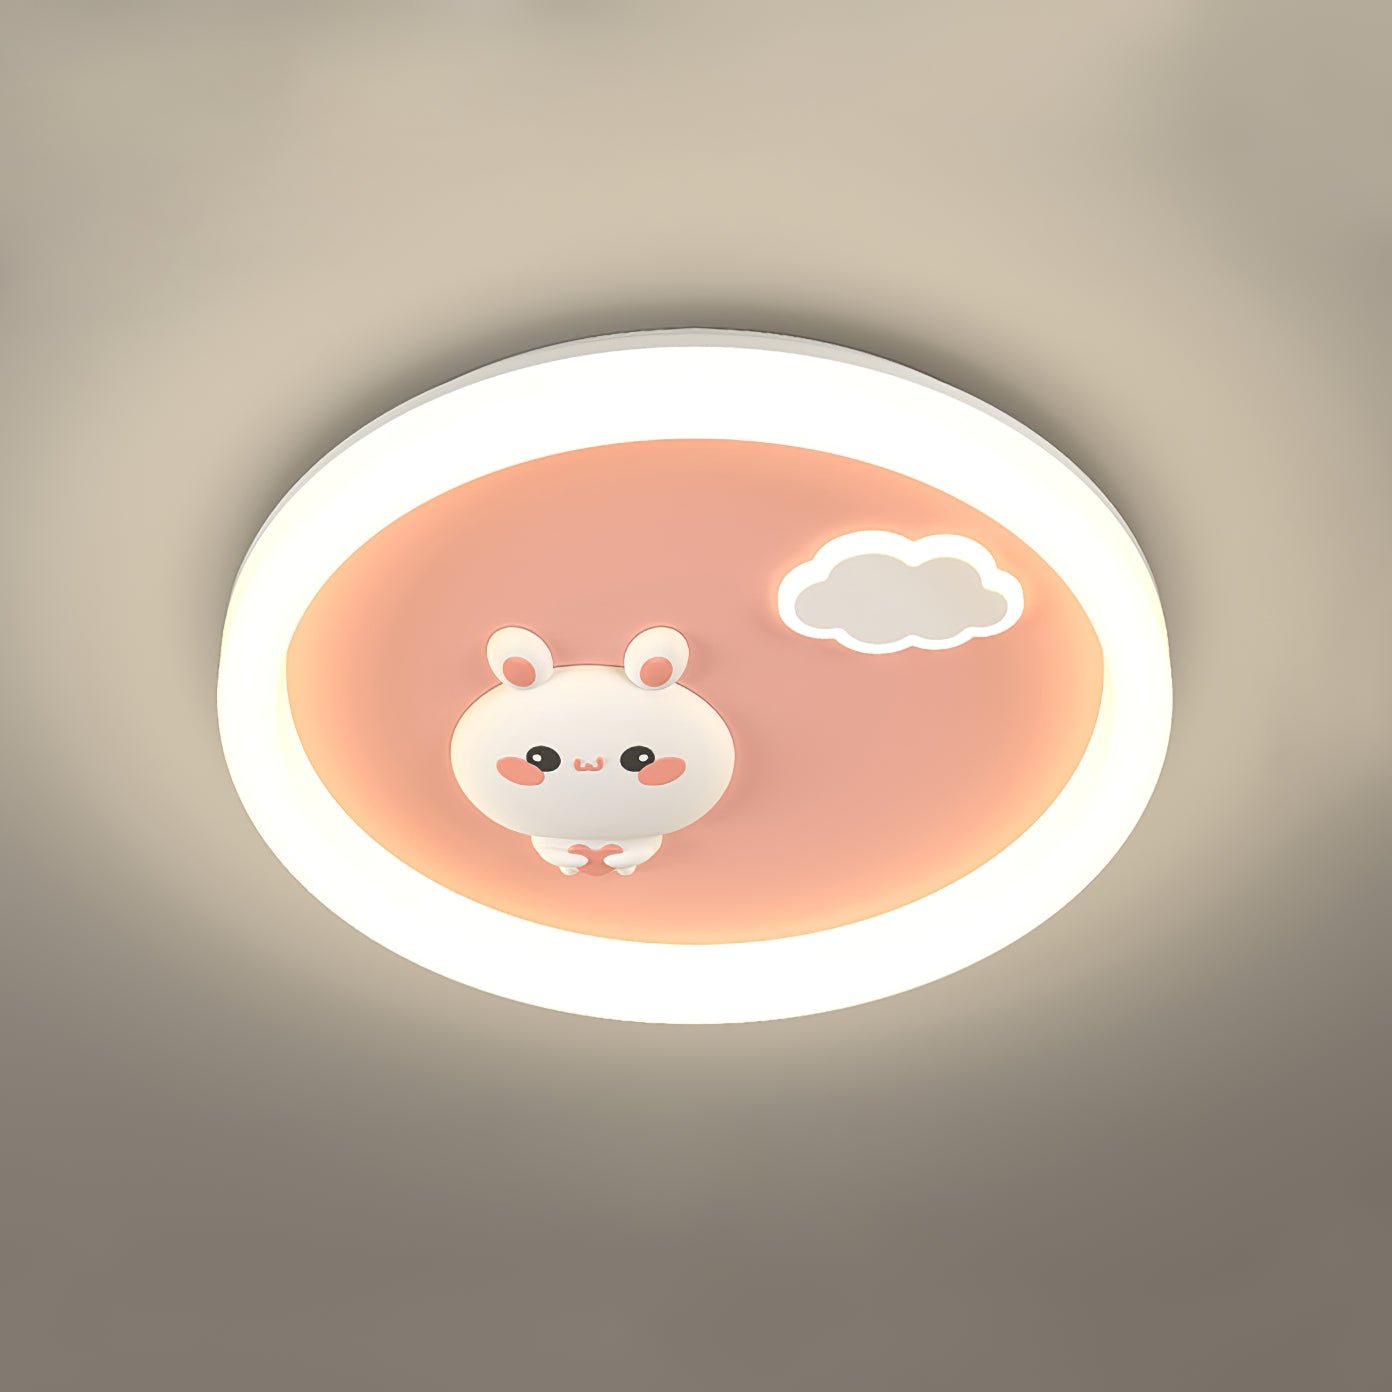 Pink Rabbit Circular Ceiling Lamp with a diameter of 19.7 inches and a height of 2.4 inches (or a diameter of 50cm and a height of 6cm). It comes in Model B Pink with a cool light feature.